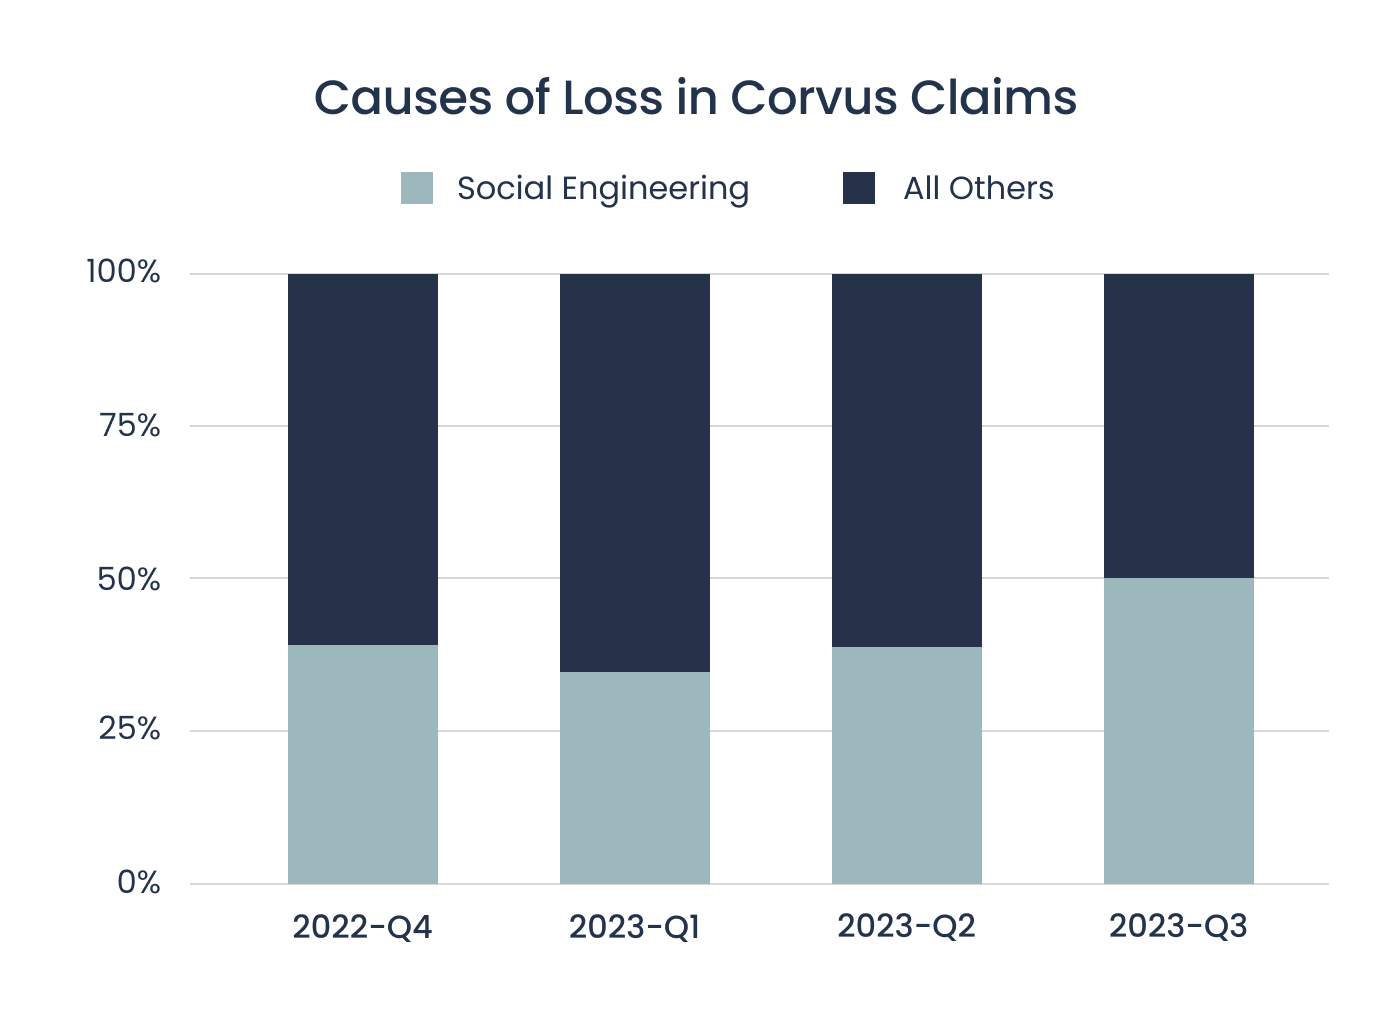 [BAR GRAPH] Caused of Loss in Corvus Claims from Social Engineering and All Other Attacks from  Q4 2022 to Q3 2023